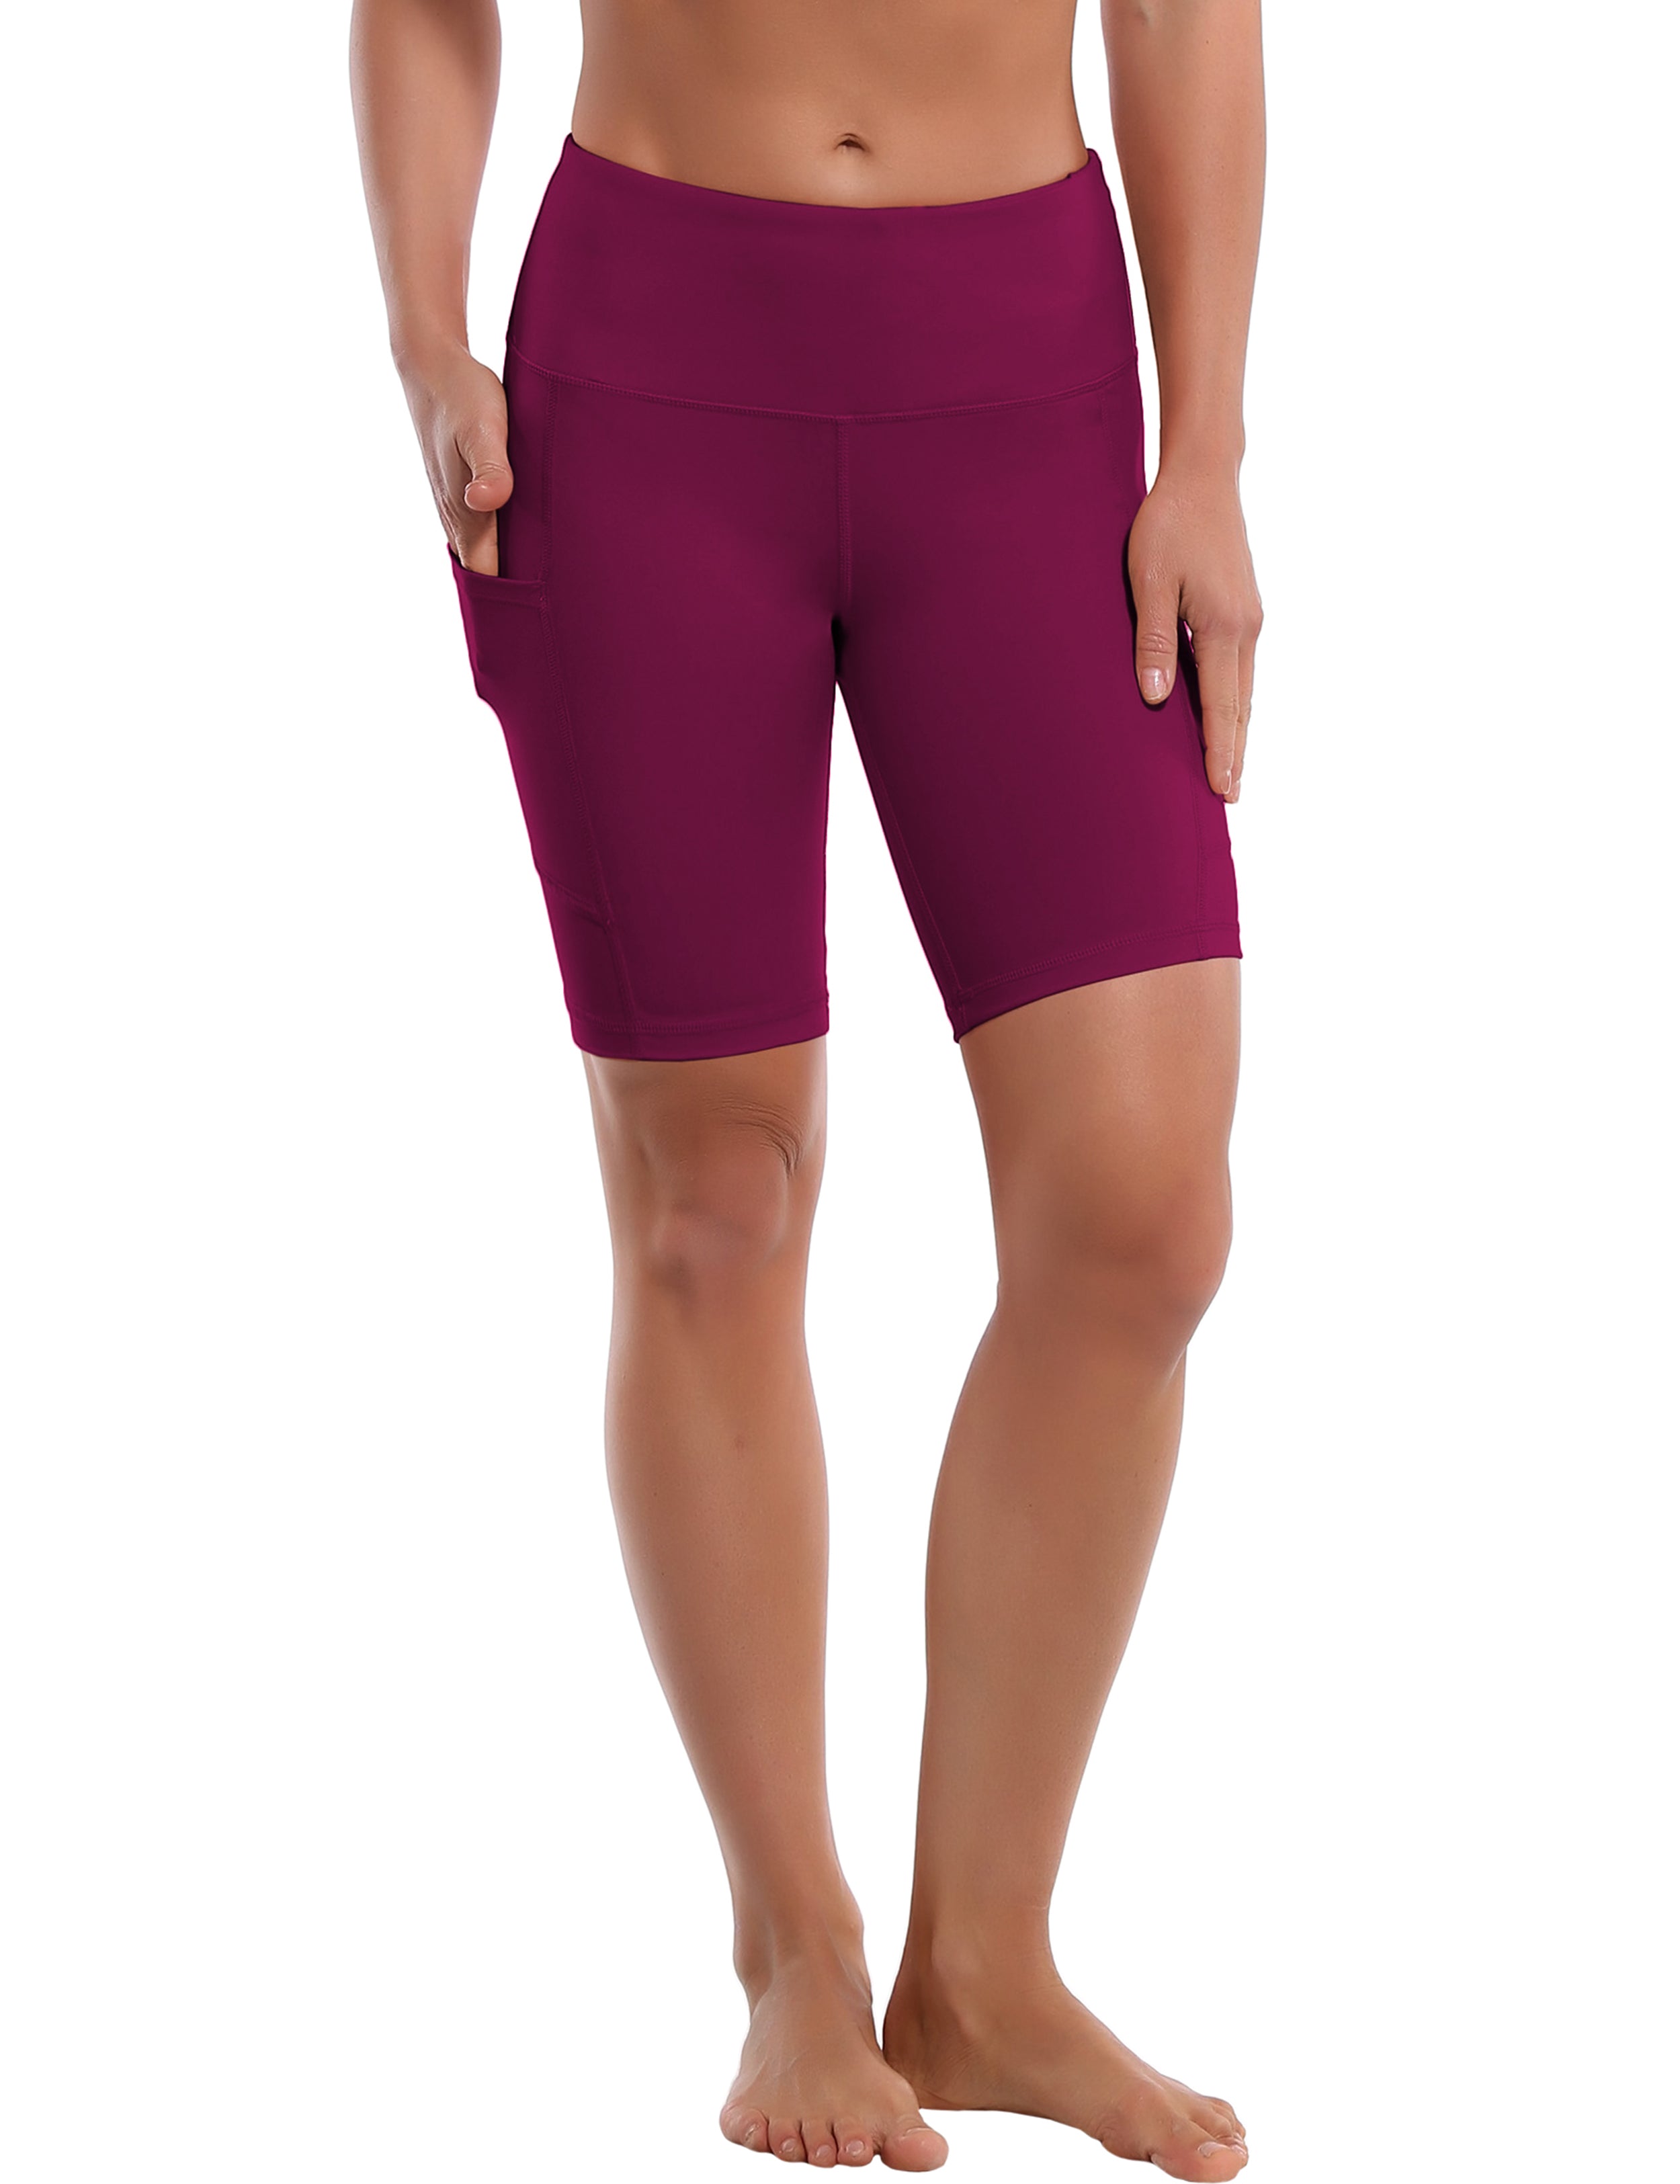 8" Side Pockets Jogging Shorts grapevine Sleek, soft, smooth and totally comfortable: our newest style is here. Softest-ever fabric High elasticity High density 4-way stretch Fabric doesn't attract lint easily No see-through Moisture-wicking Machine wash 75% Nylon, 25% Spandex